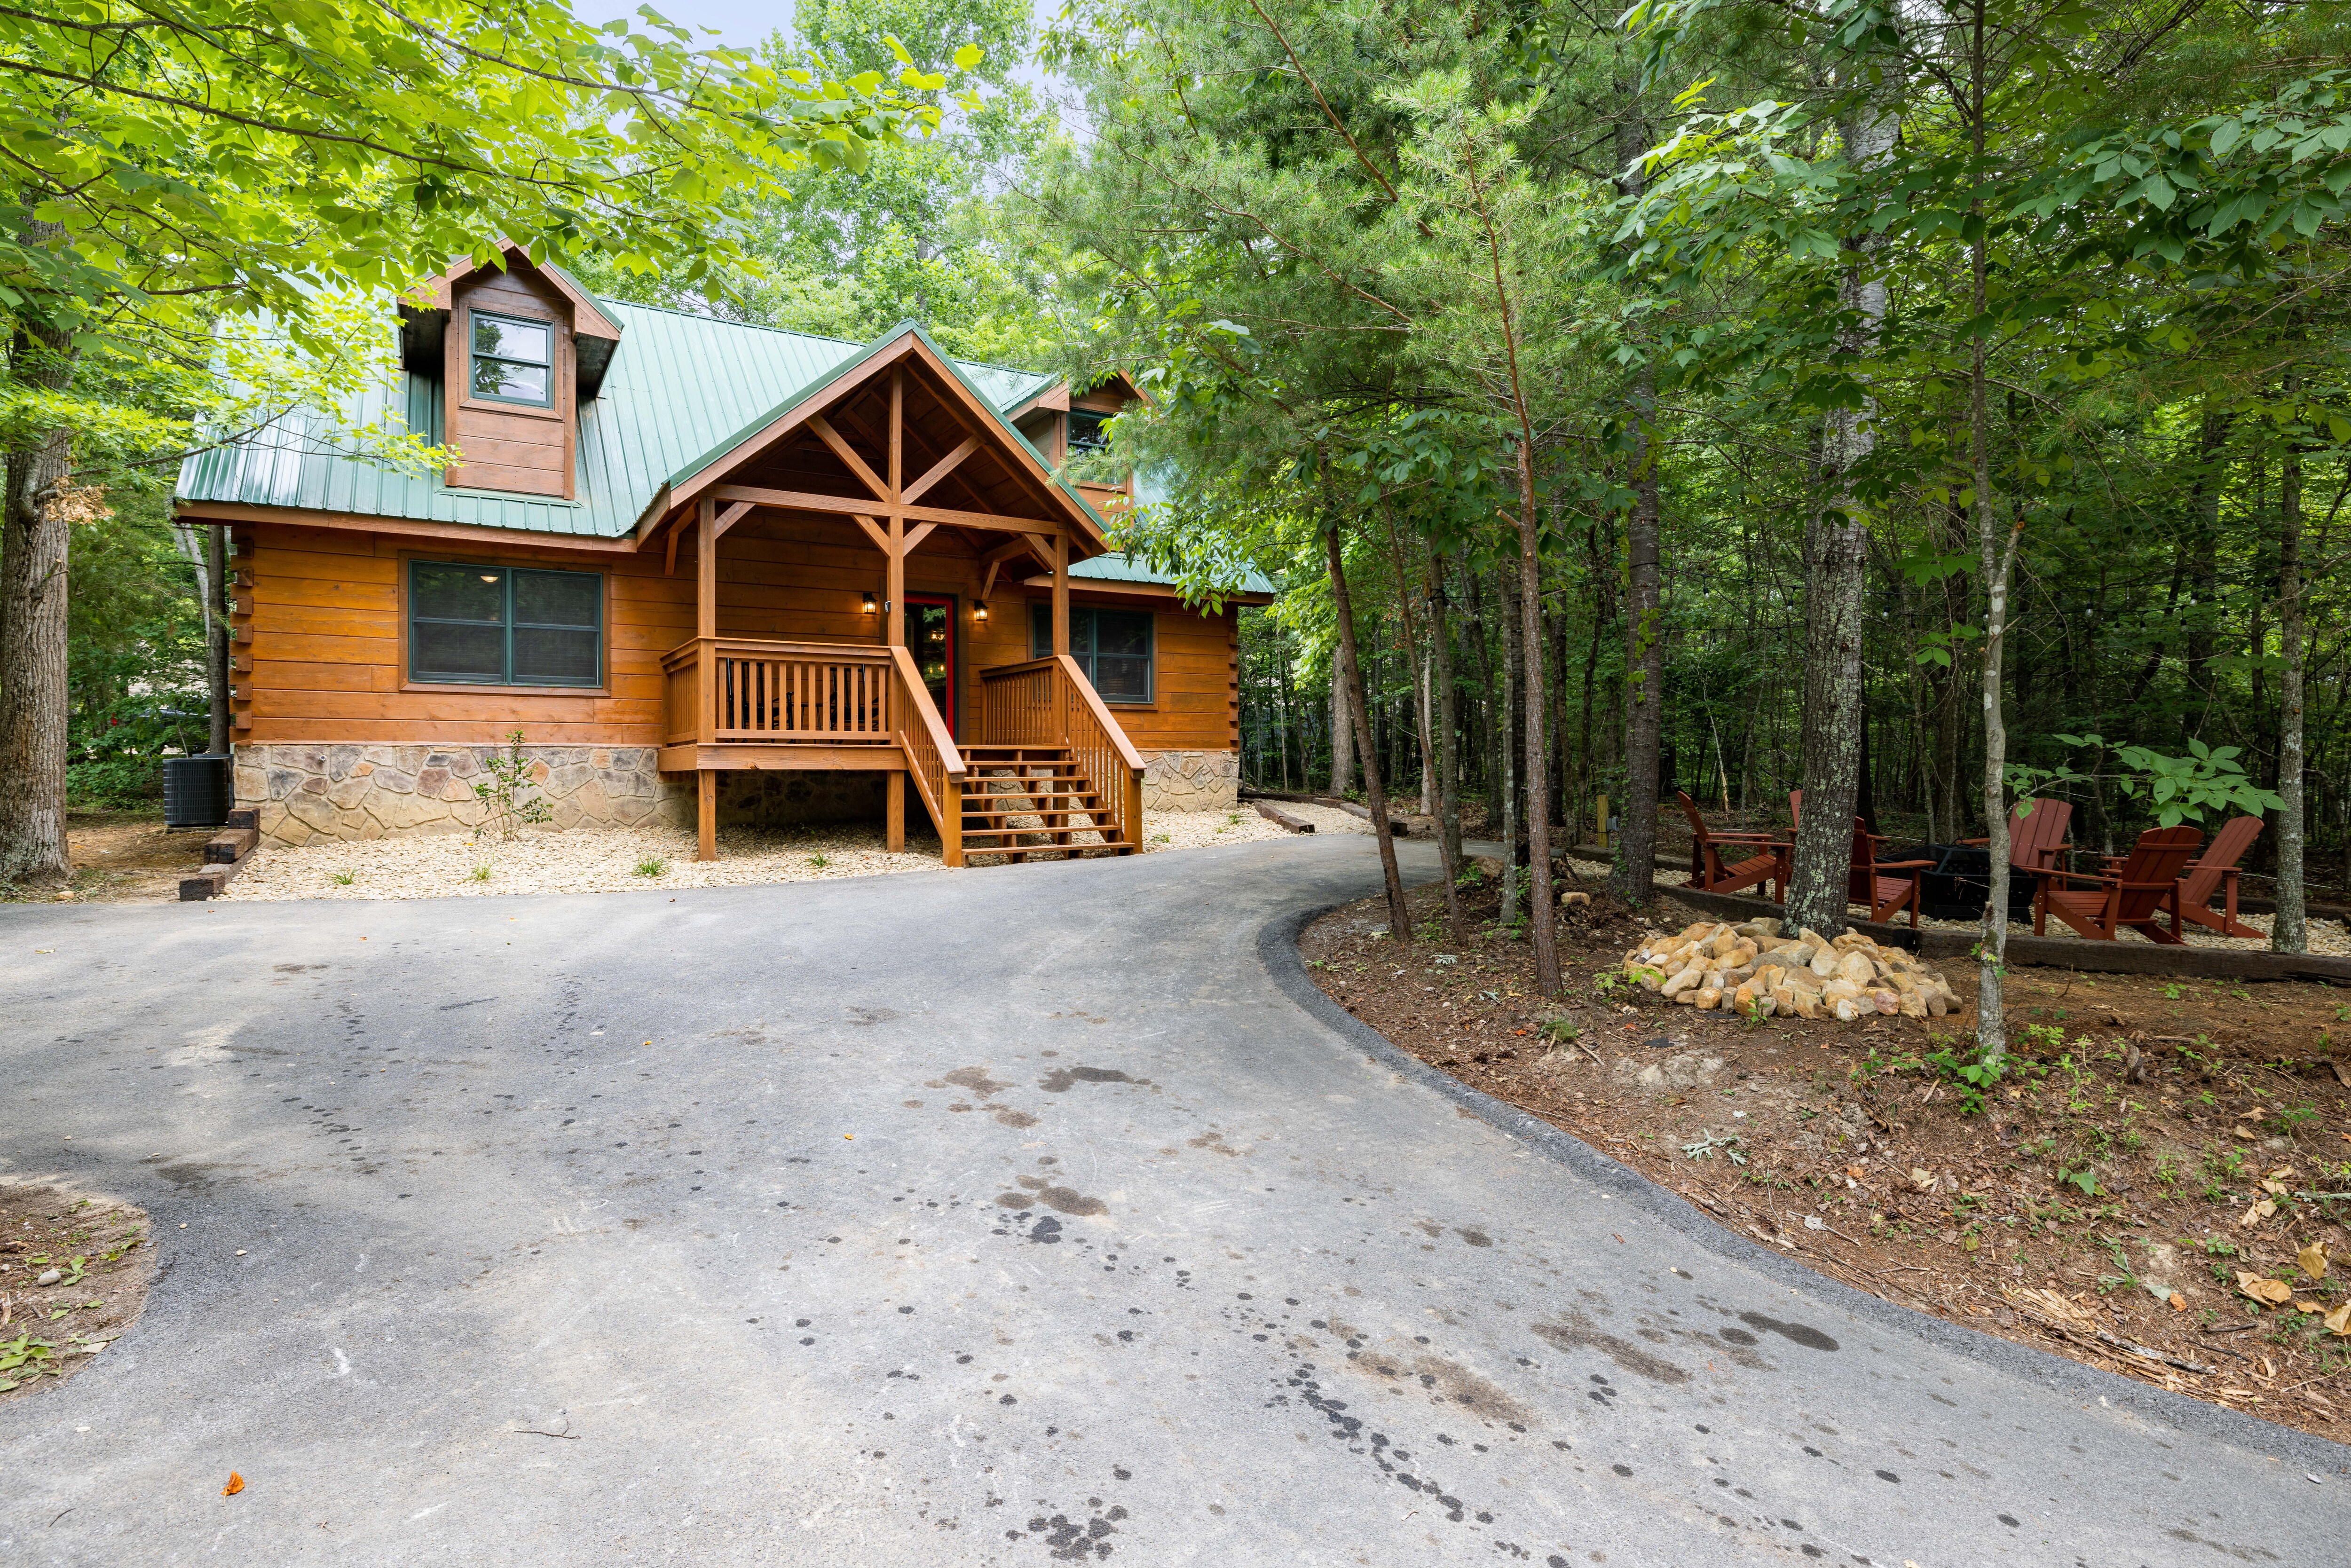 Property Image 2 - Awesome Adventures is a luxury dog-friendly cabin in the Smokies perfect for you and your family!